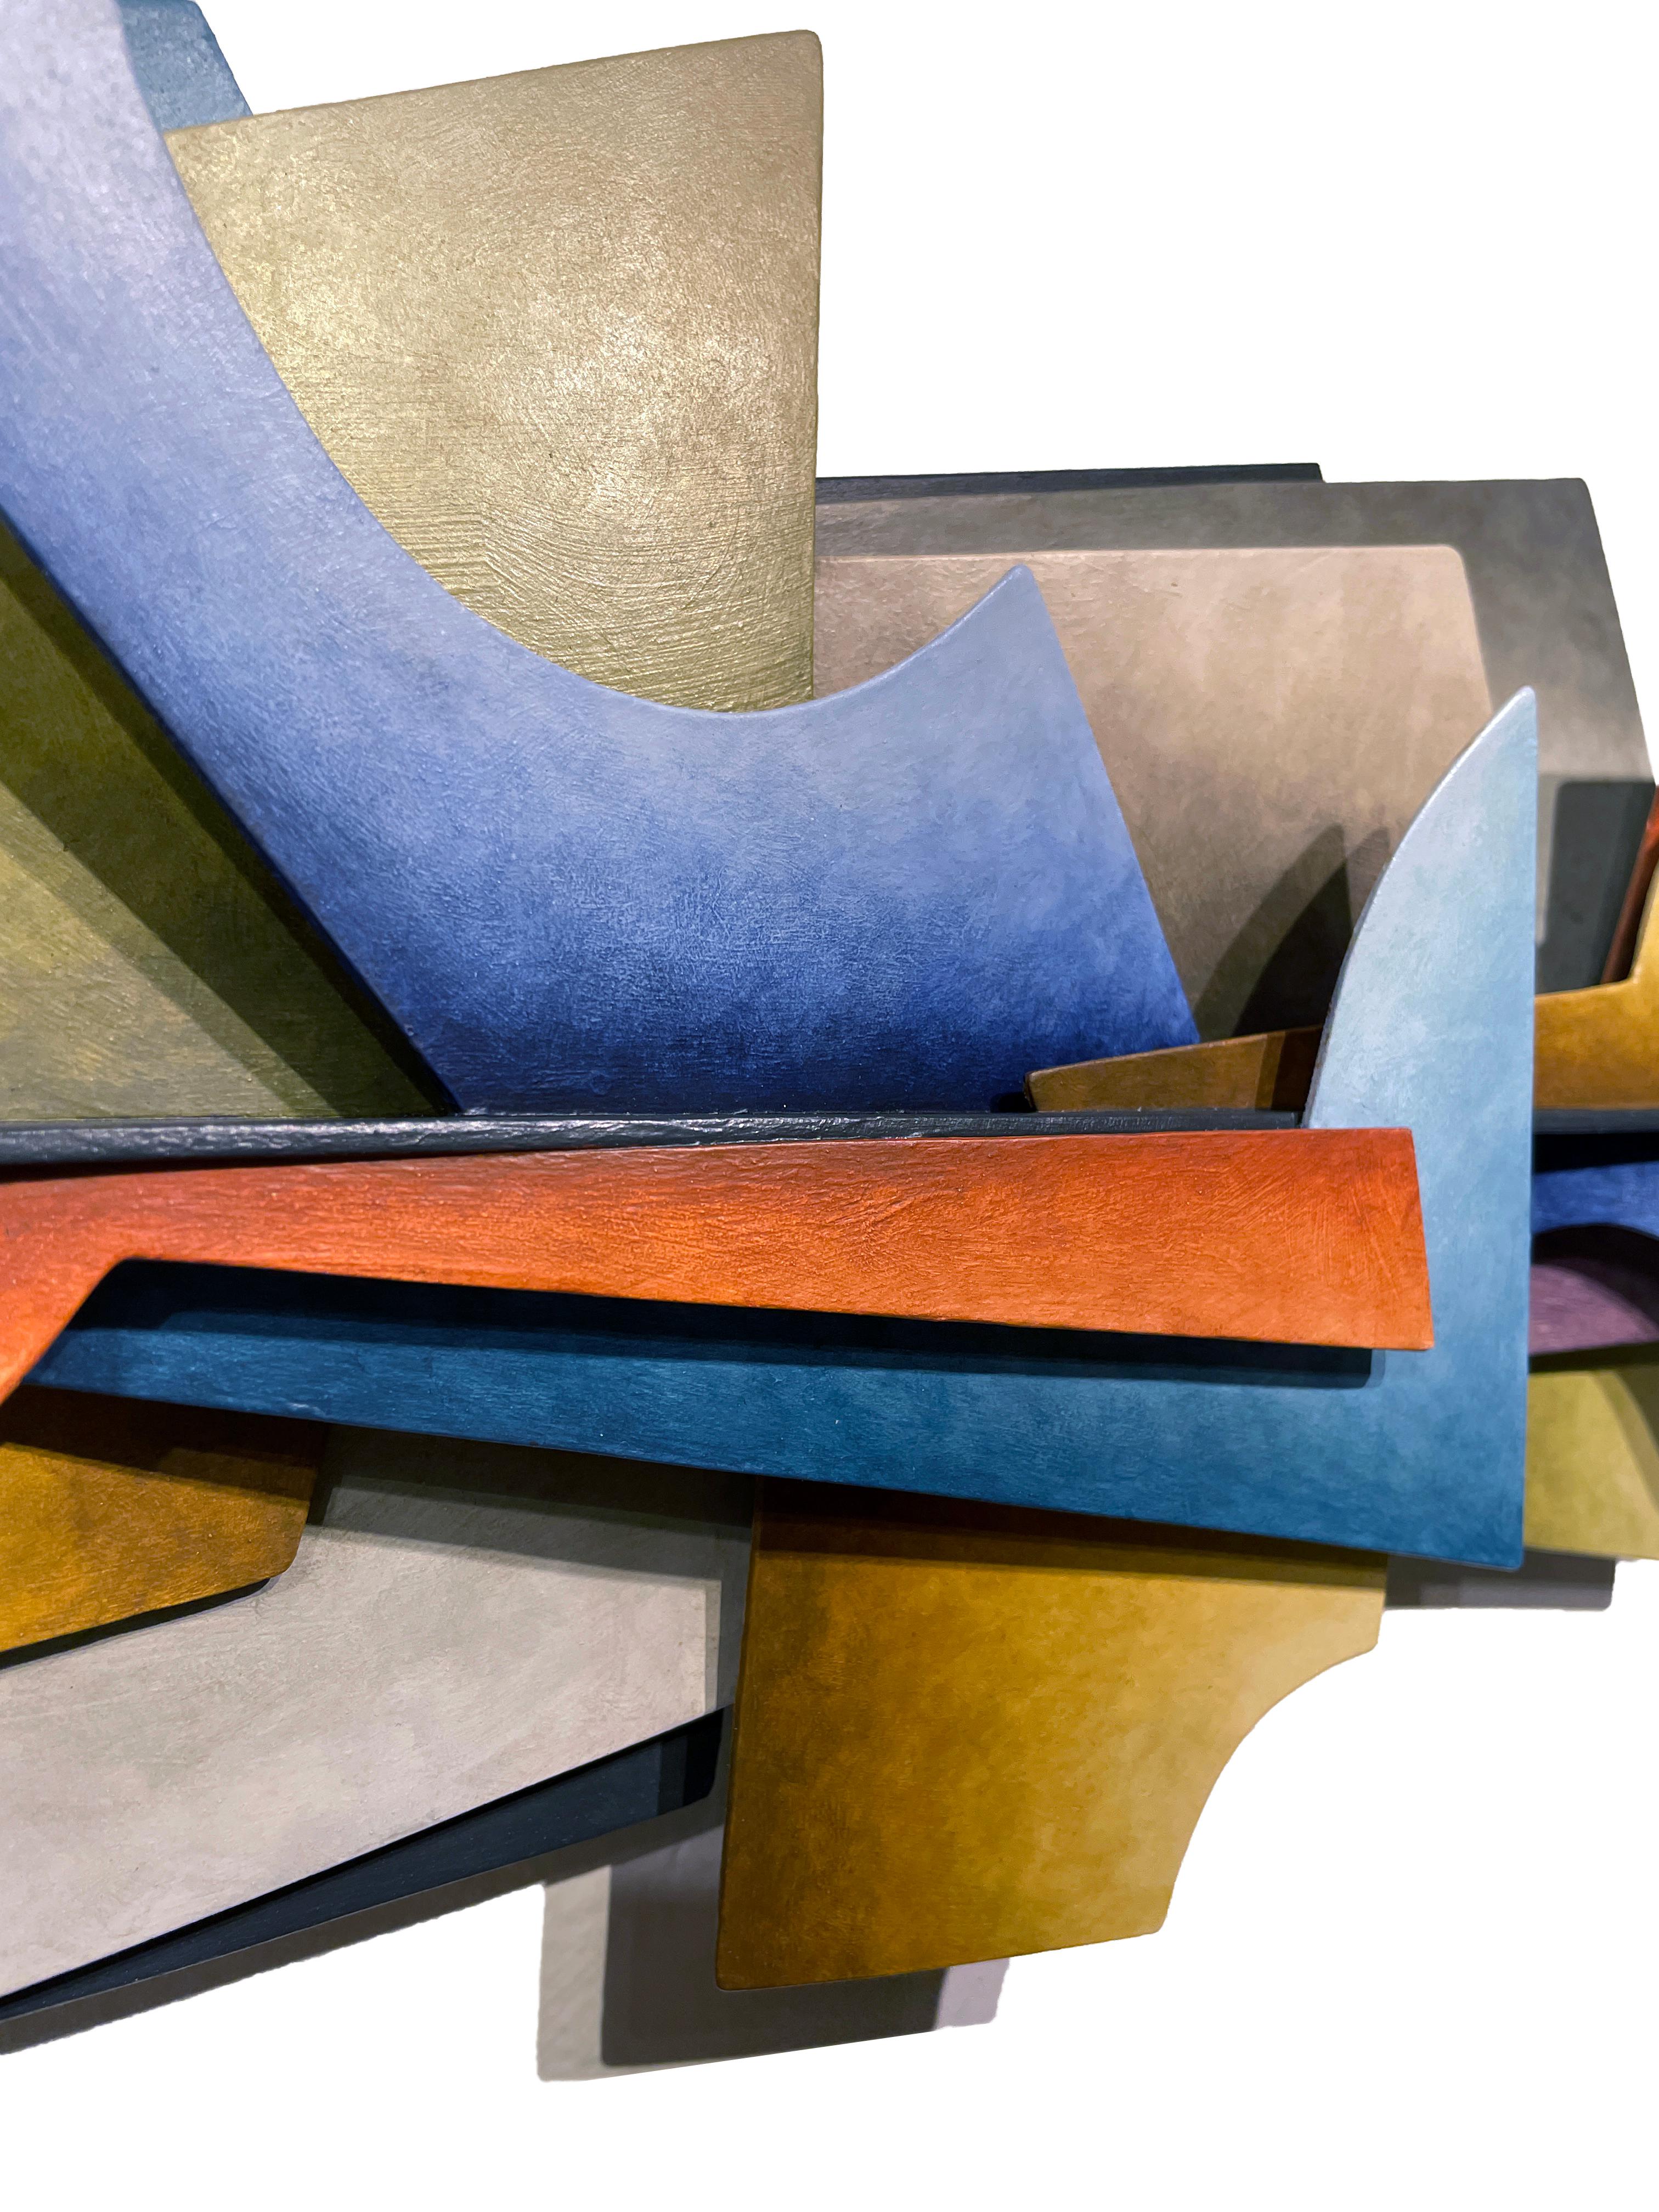 Woven Plane - Abstract Geometric Form, Hand Painted Welded Steel Wall Sculpture  For Sale 2